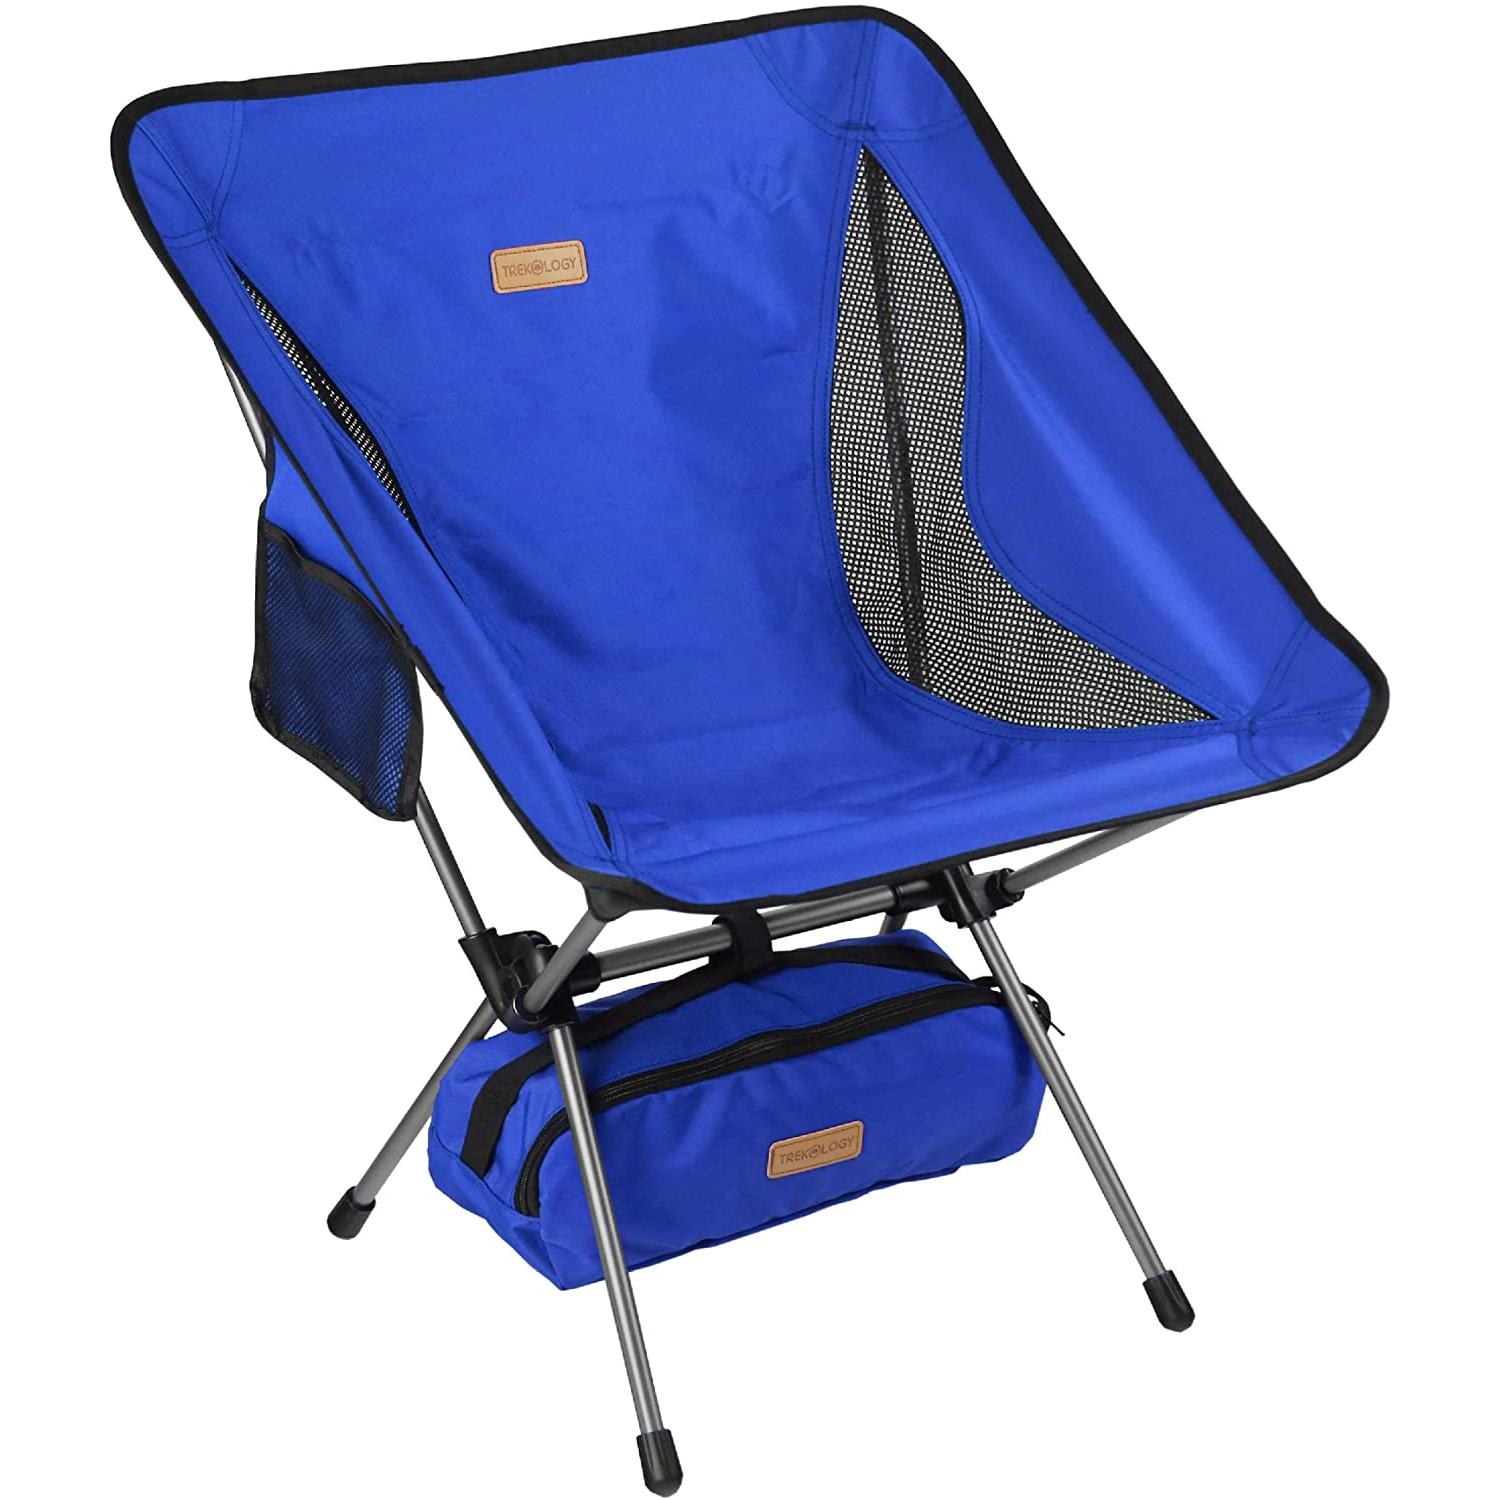 Trekology YIZI GO Portable Camping Chair - Compact Ultralight Folding Backpacking Chairs, Small Collapsible Foldable Packable Lightweight Backpack Chair in a Bag